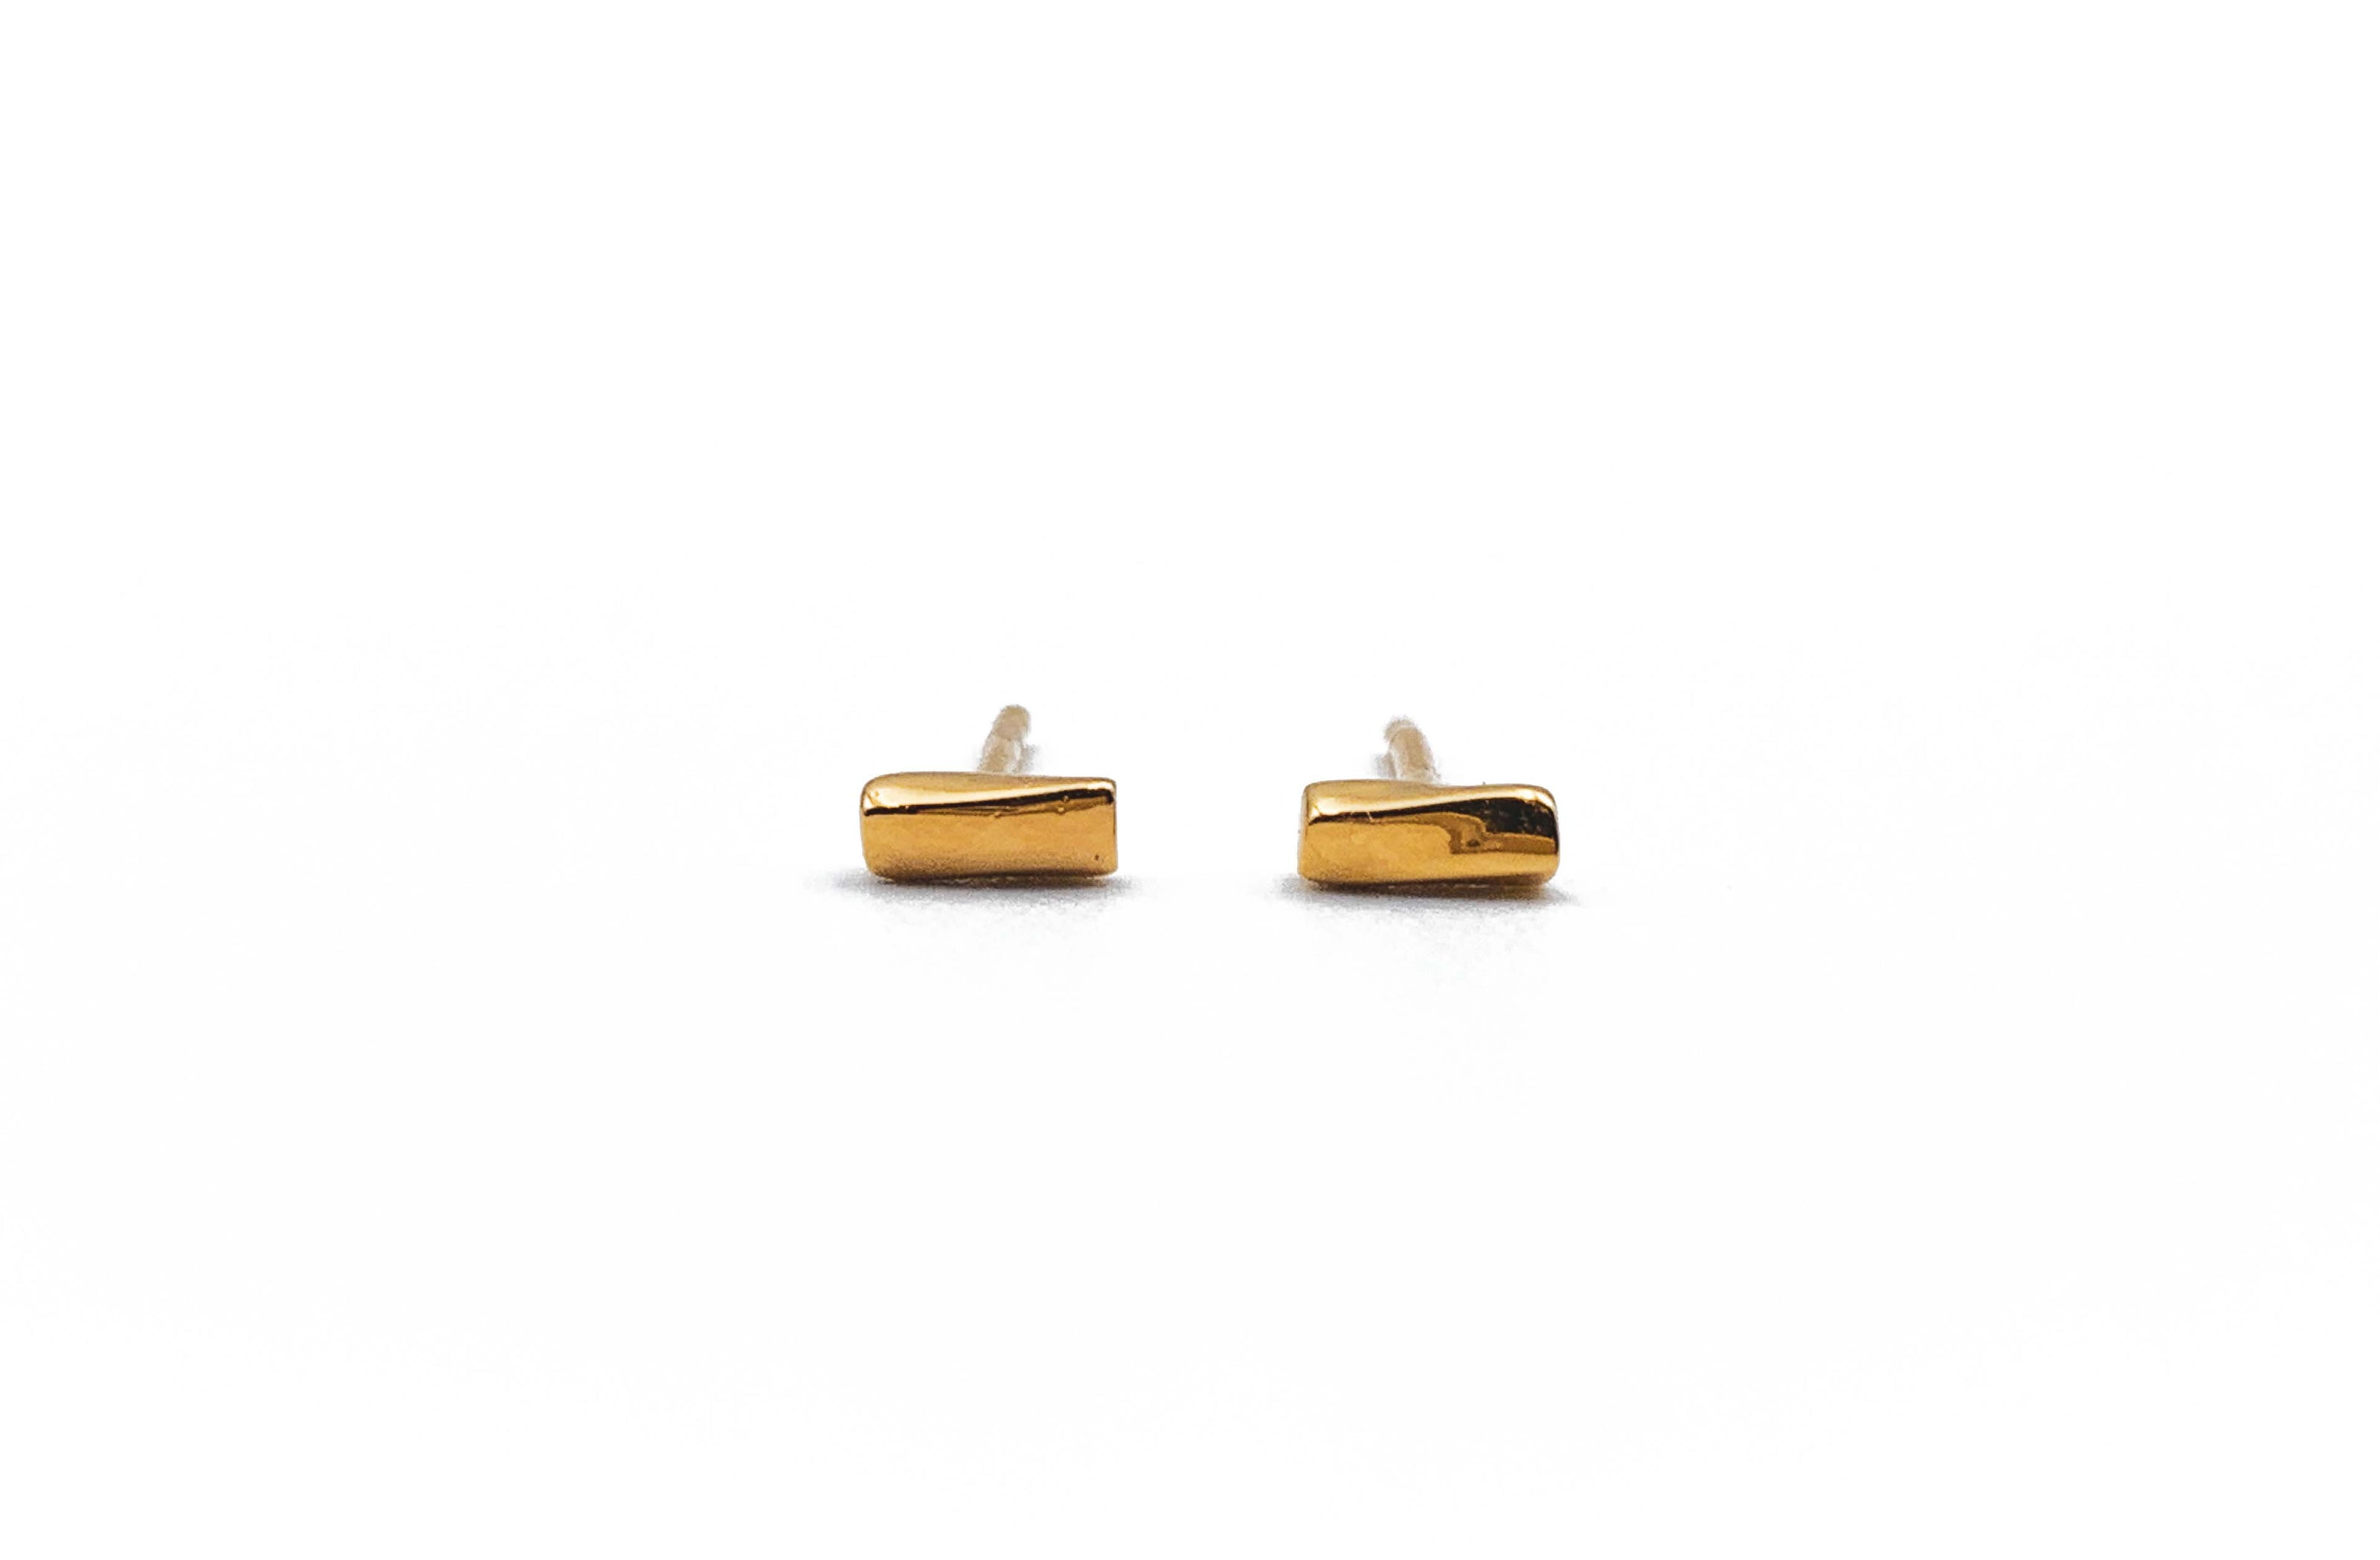 9ct gold stud earrings 9mm - available from Thor Collective 